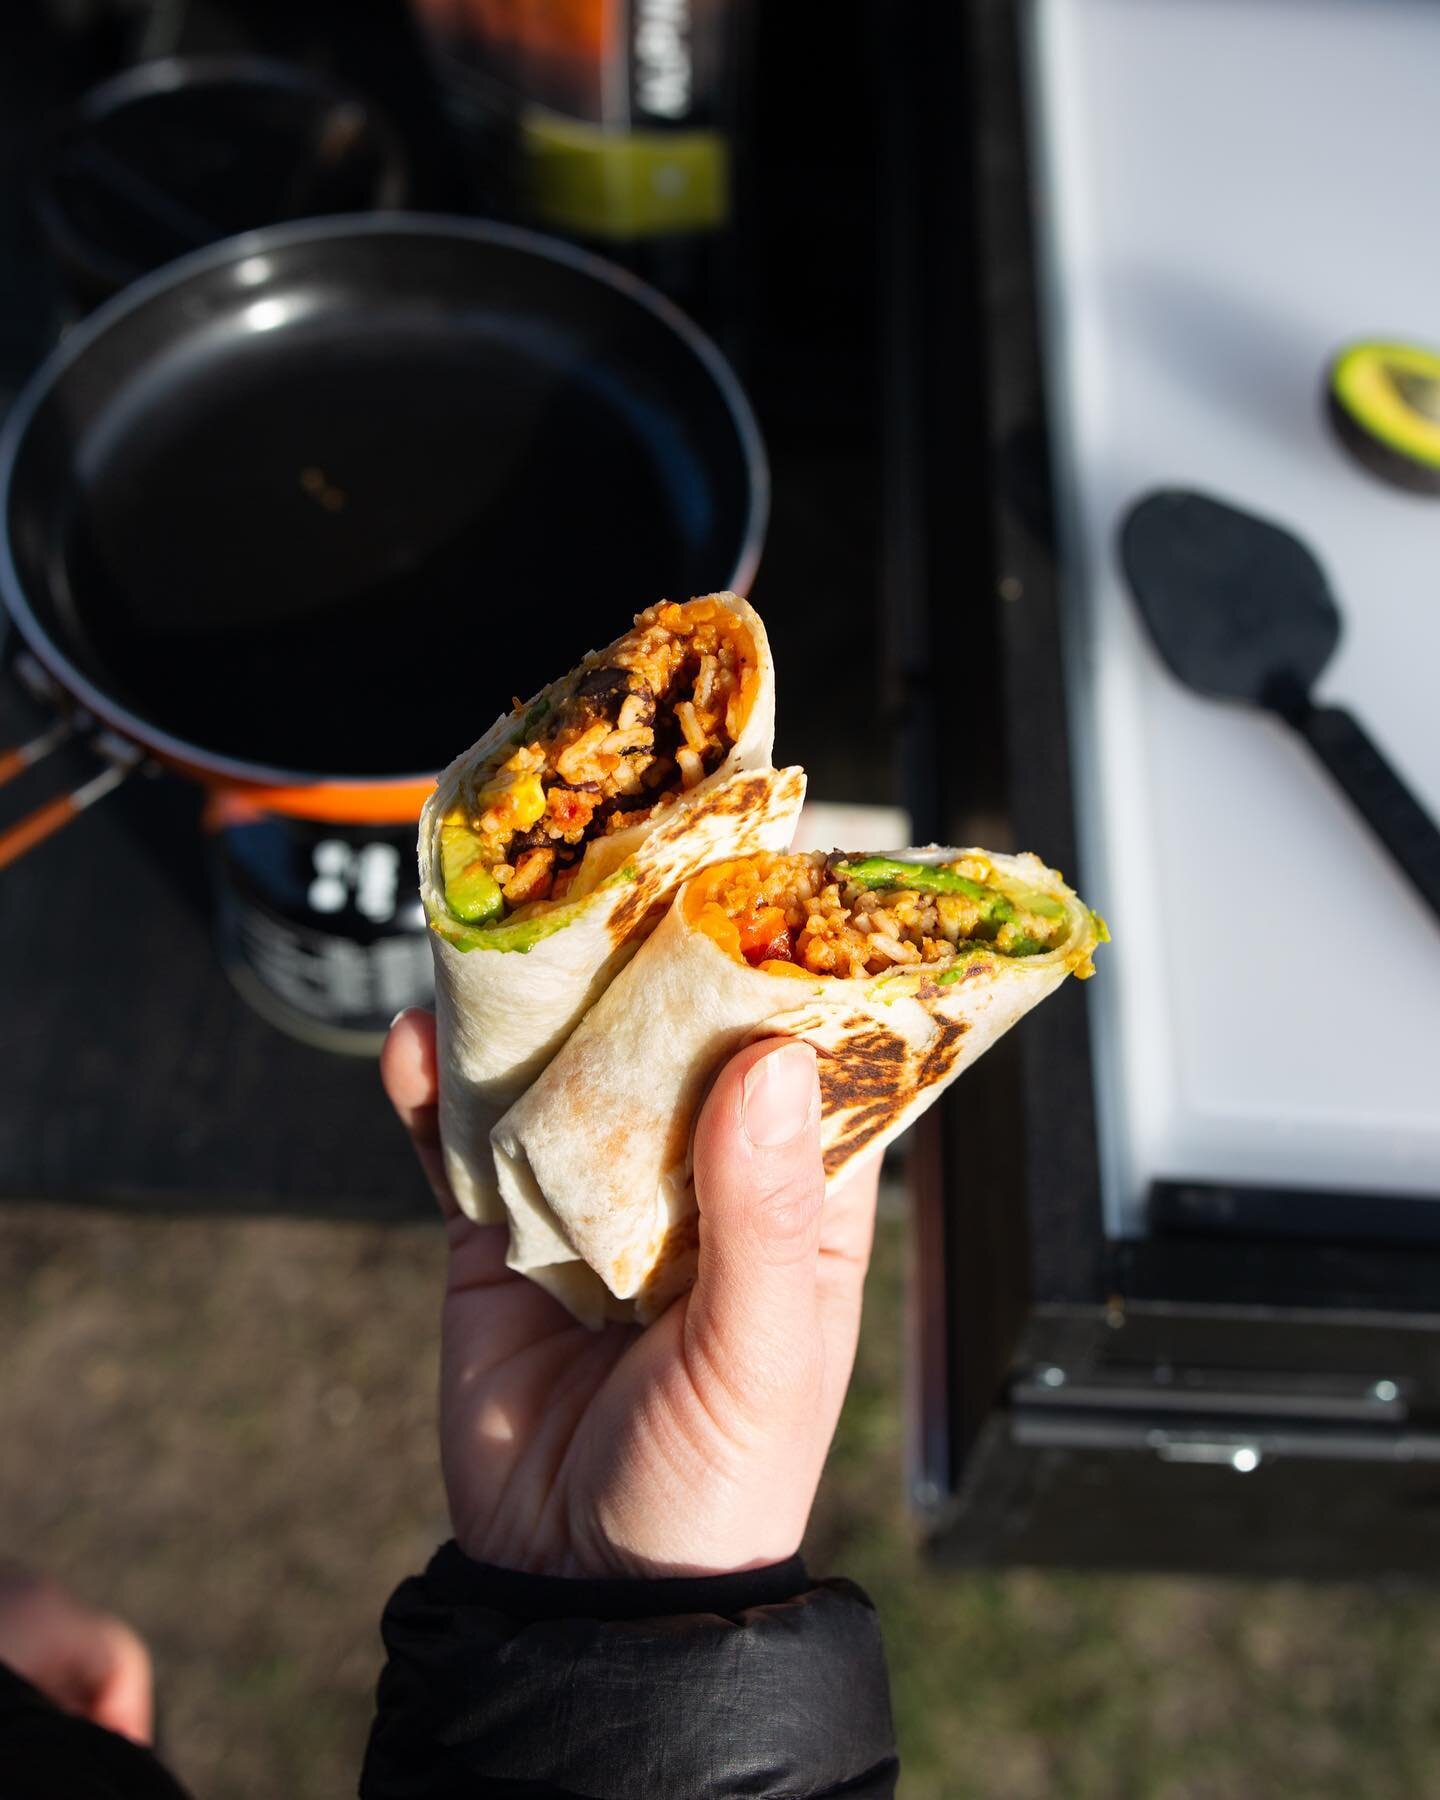 I&rsquo;m sure you&rsquo;ve realized by now that I&rsquo;m a big fan of quick and easy meals. Good cooking doesn&rsquo;t need to be complicated or take 3 hours! 

These easy camp burritos use a rice and bean based dehydrated meal and a few simple ing